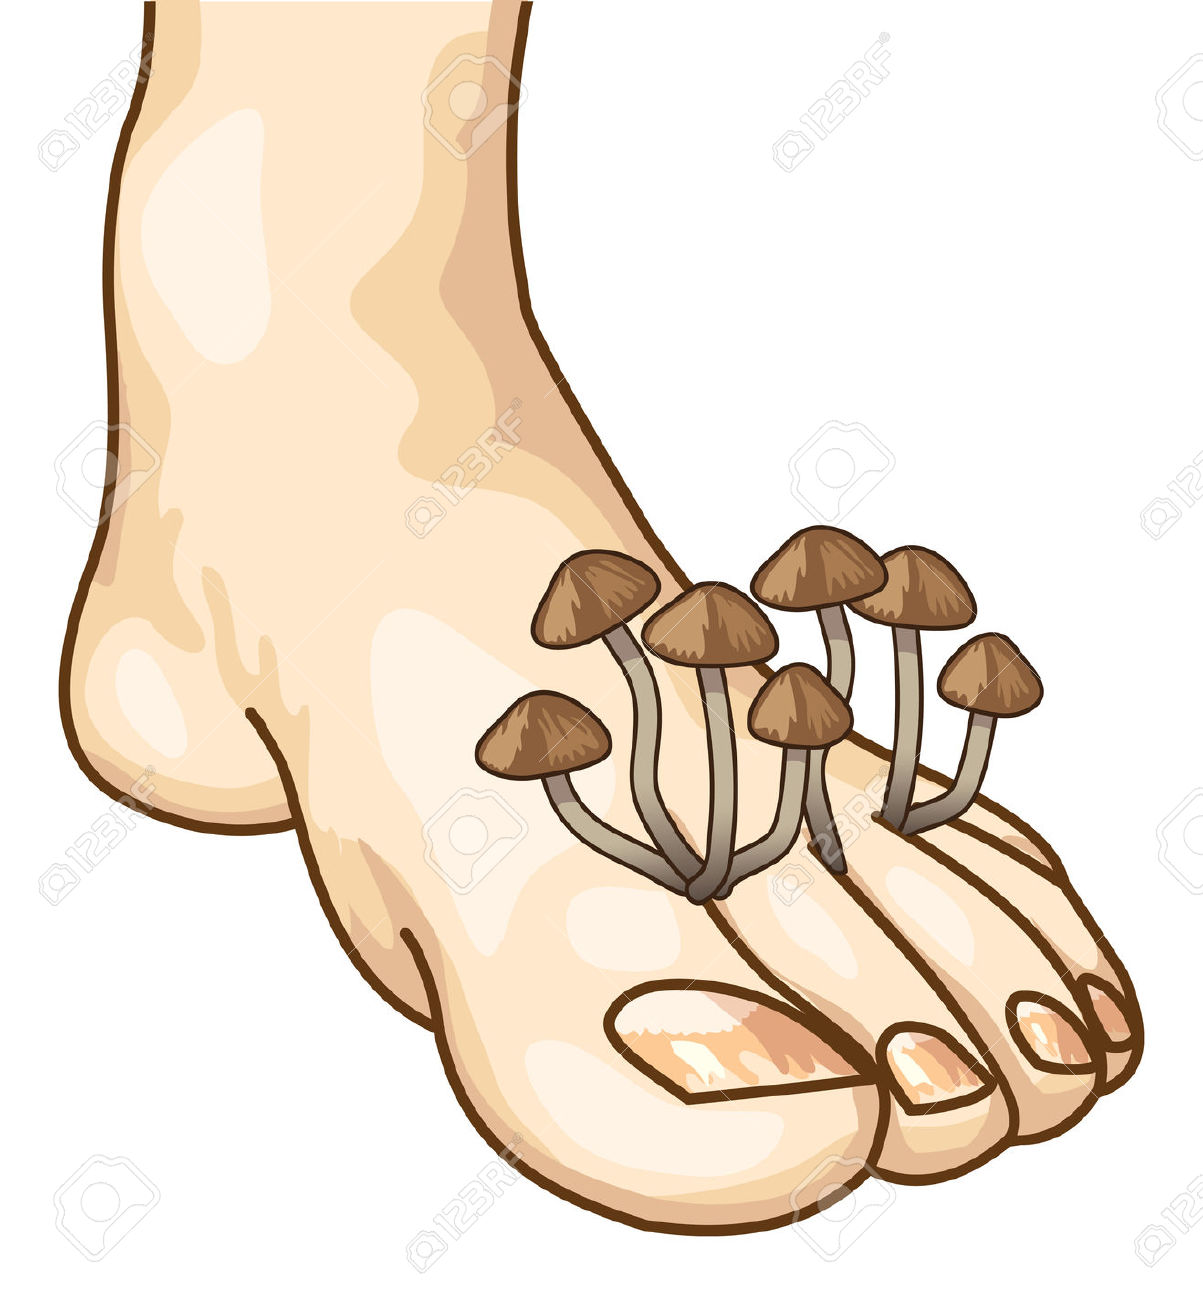 Fungal infection clipart - Clipground